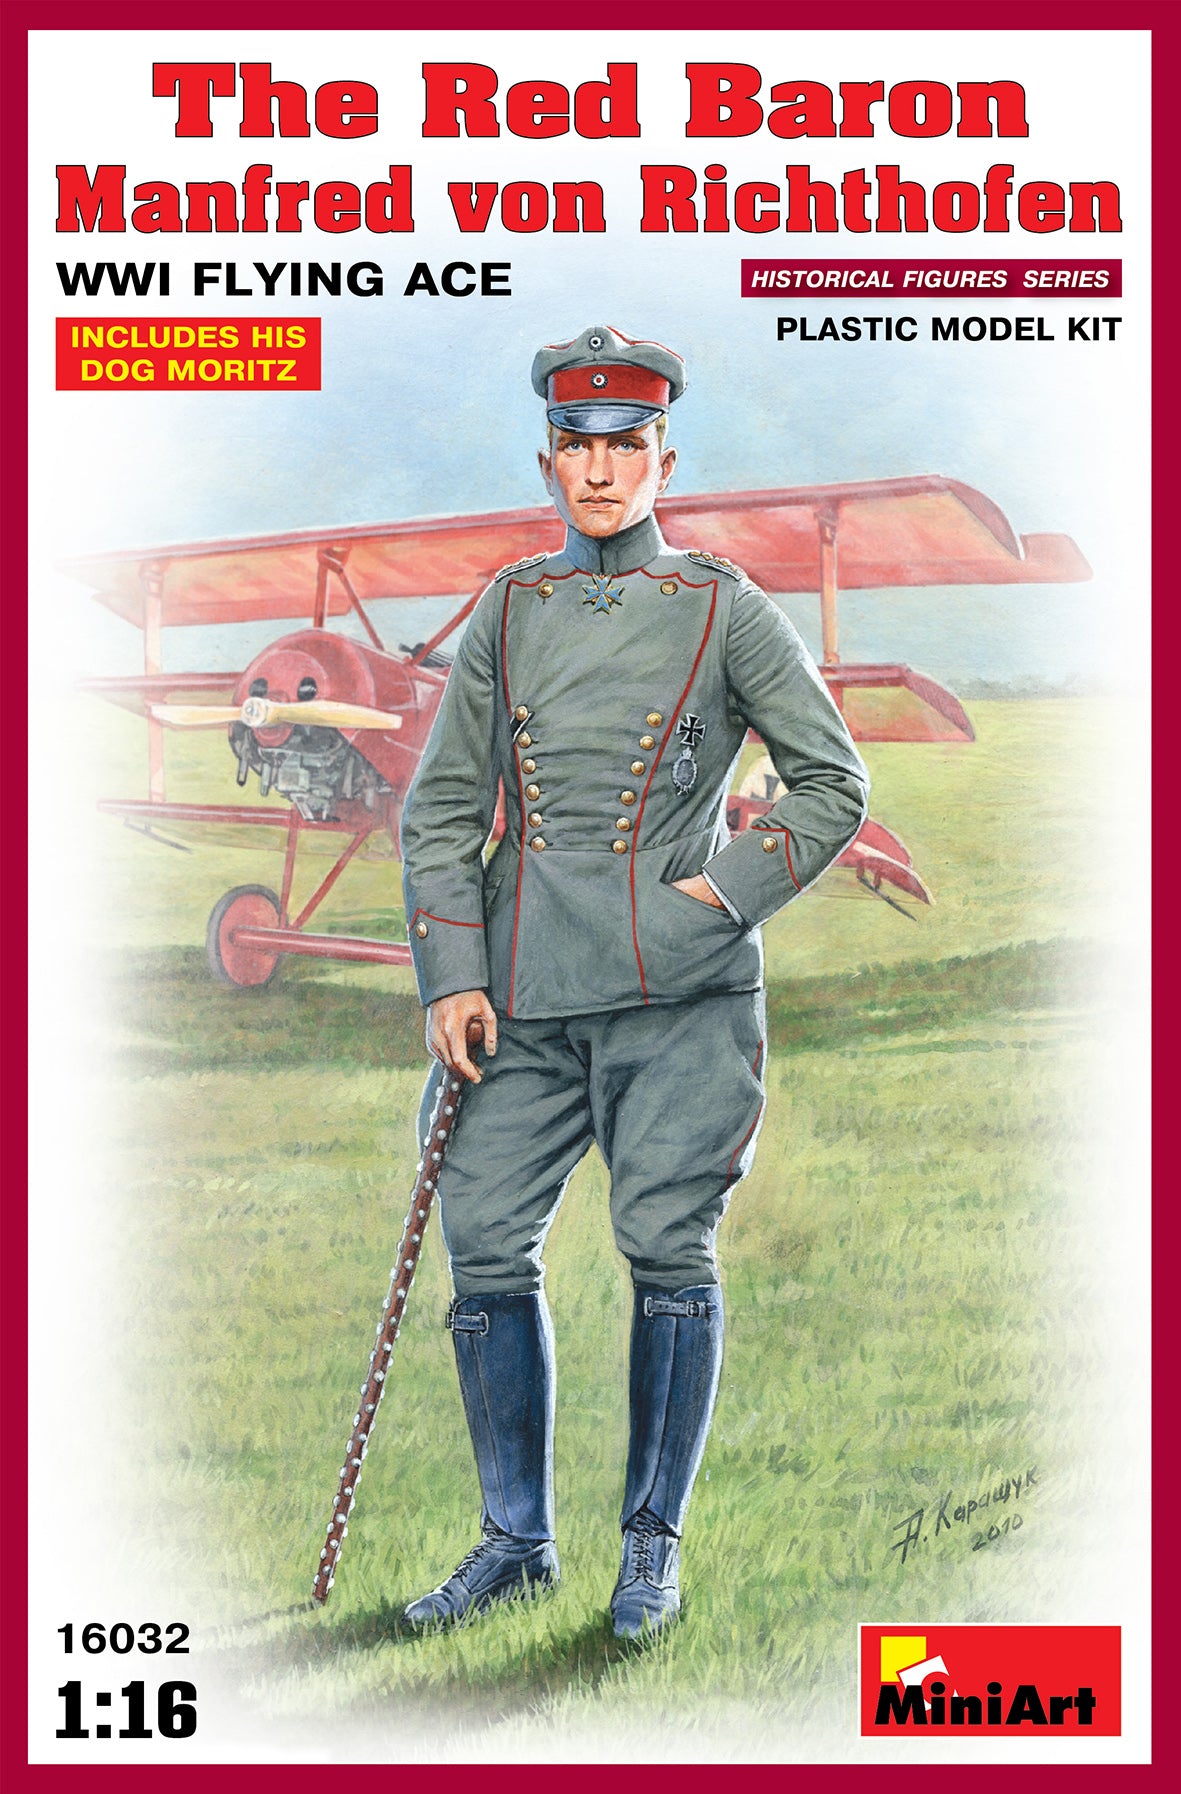 MIniart 1/16 German The Red Baron Manfred von Richthofen WWI Flying Ace 16032